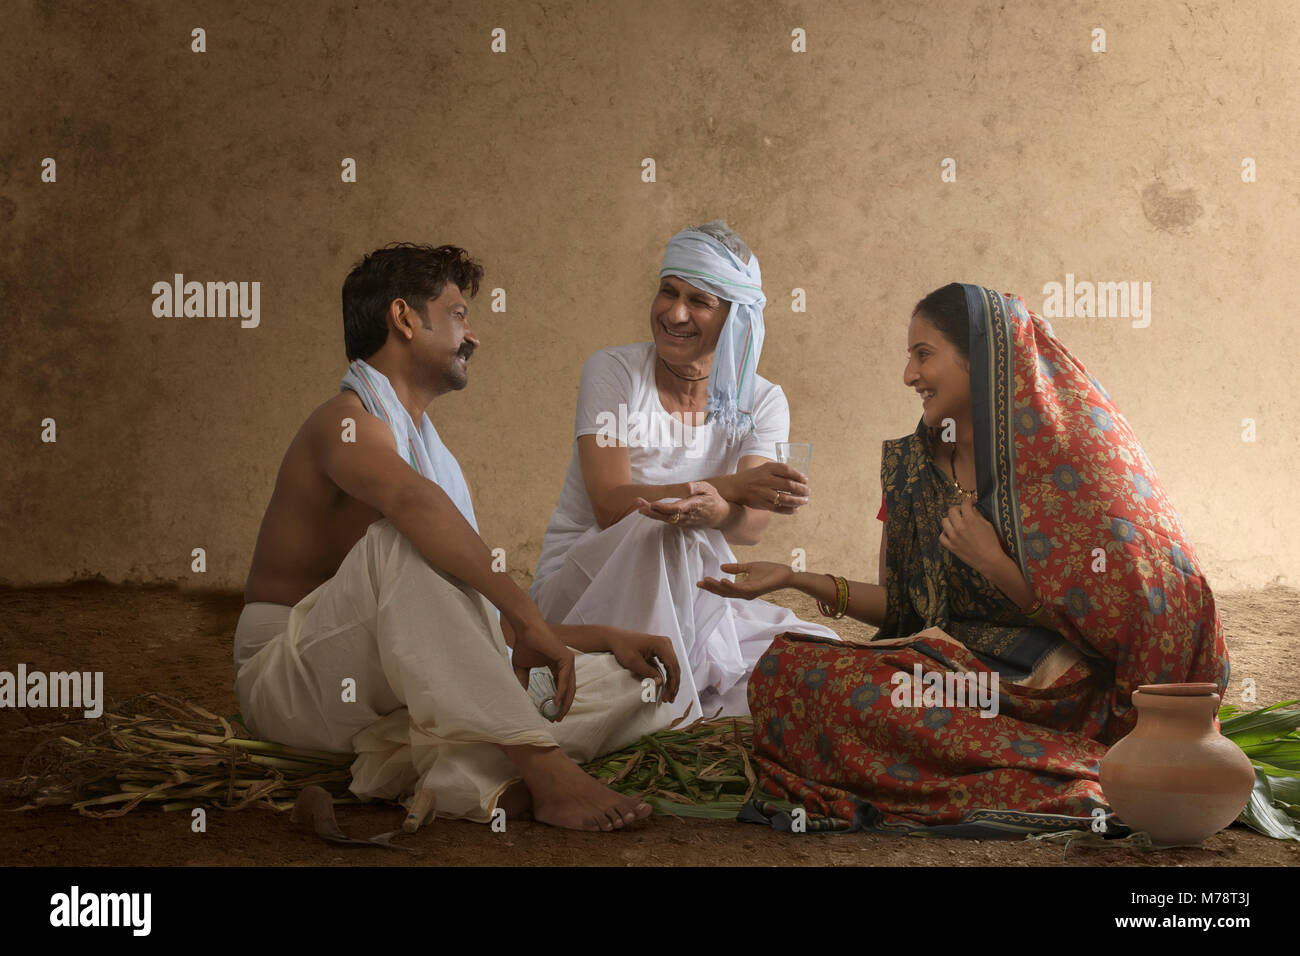 Rural Indian family sitting together and talking Stock Photo